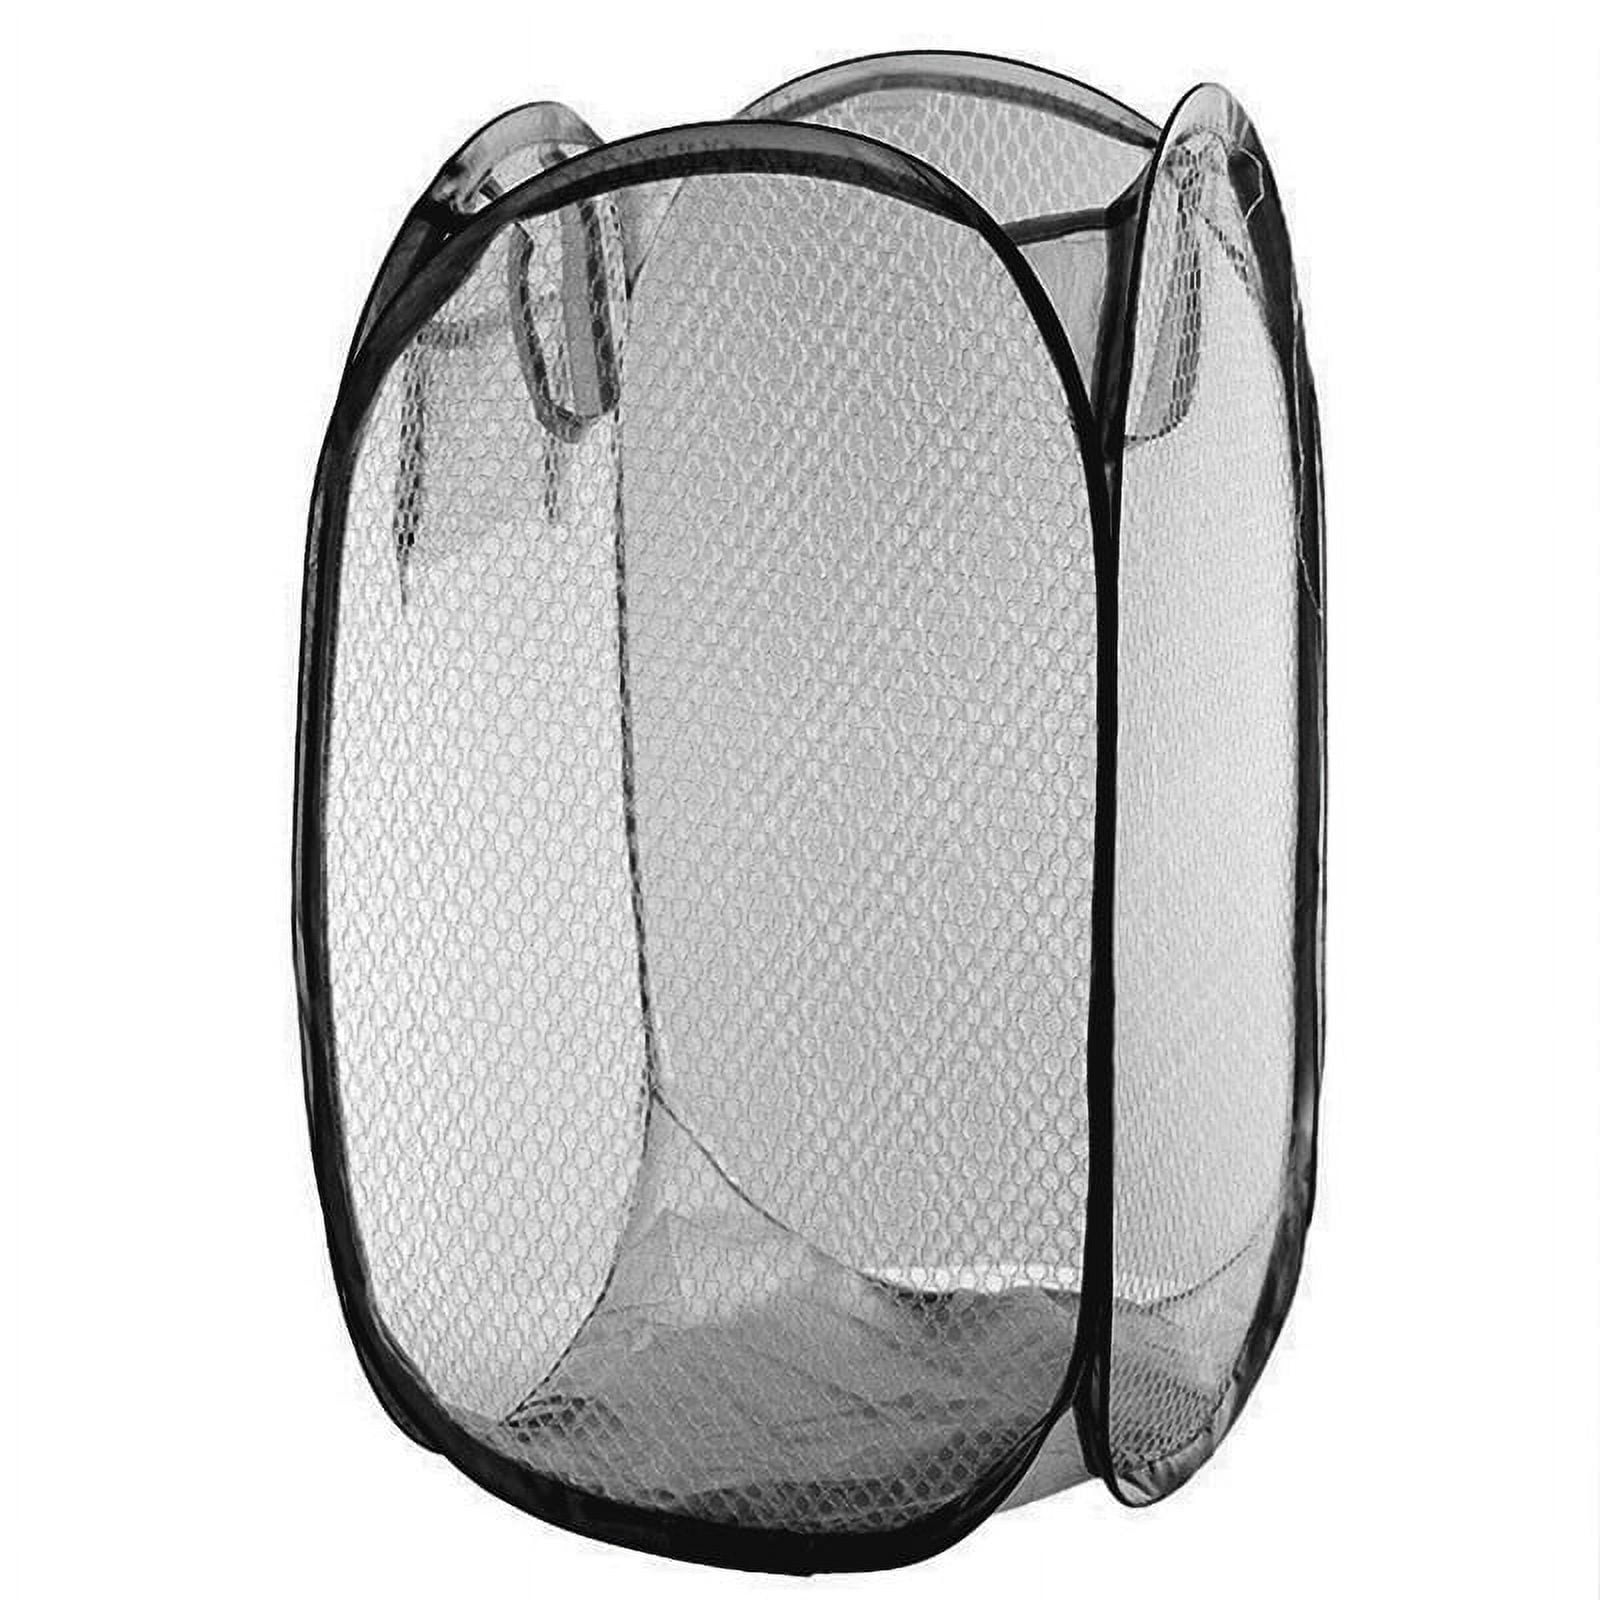 Eease Foldable Up Easy Open Mesh Laundry Clothes Hamper Basket for ...